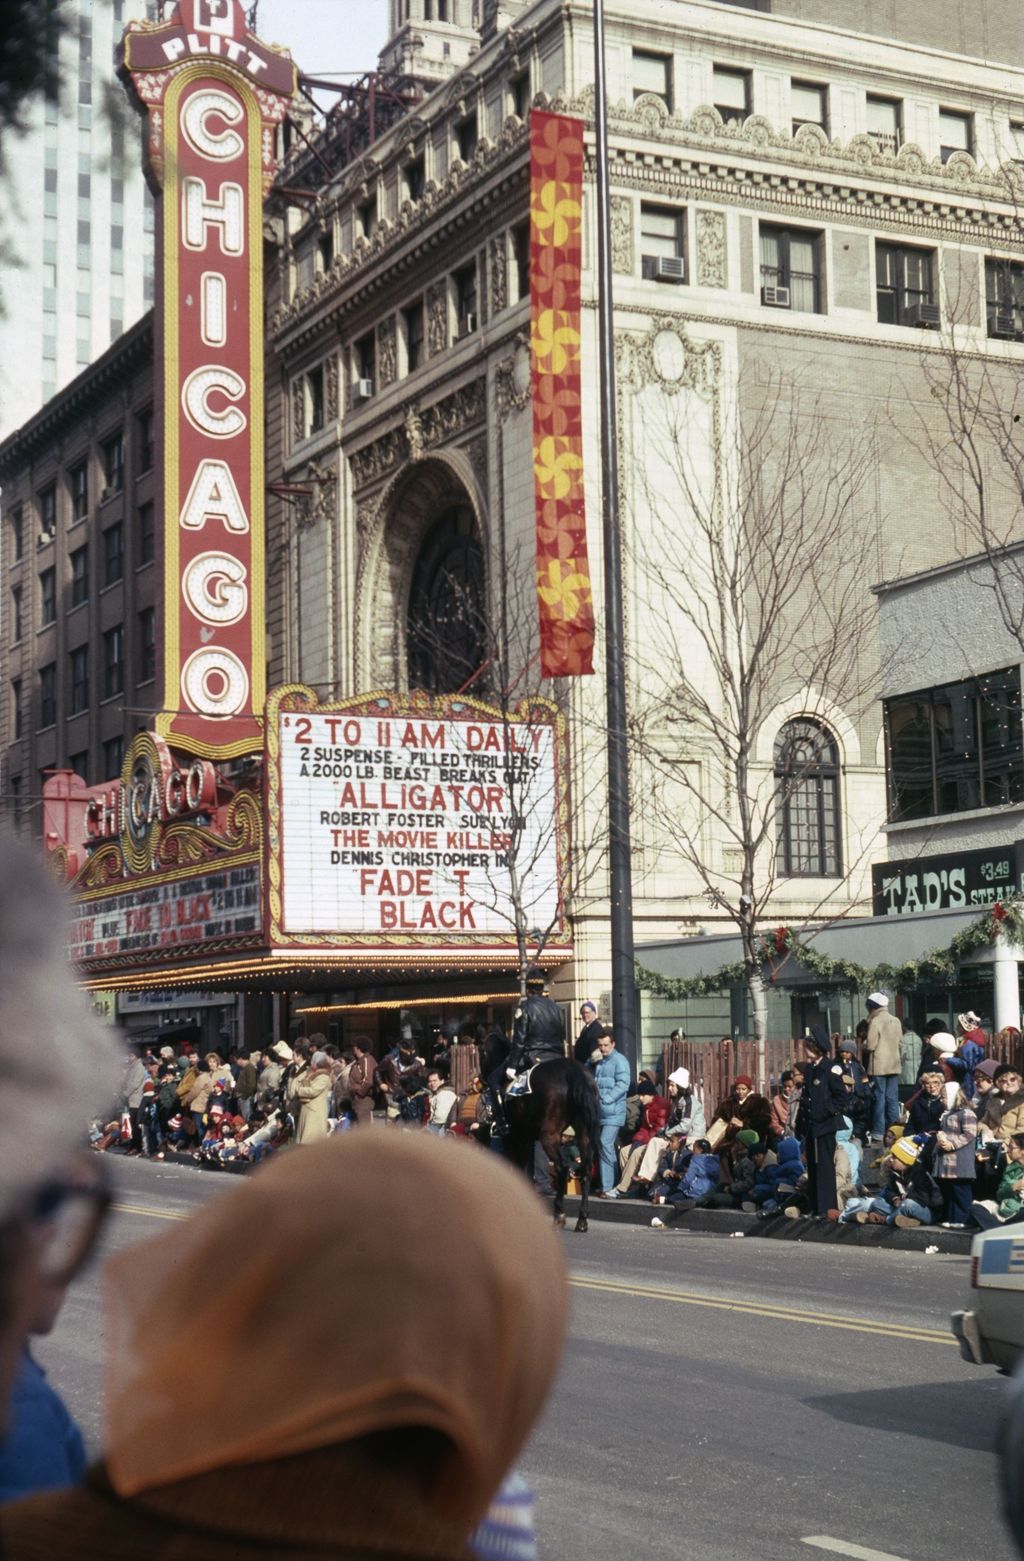 Miniature of Thanksgiving Parade crowd in front of Chicago Theater